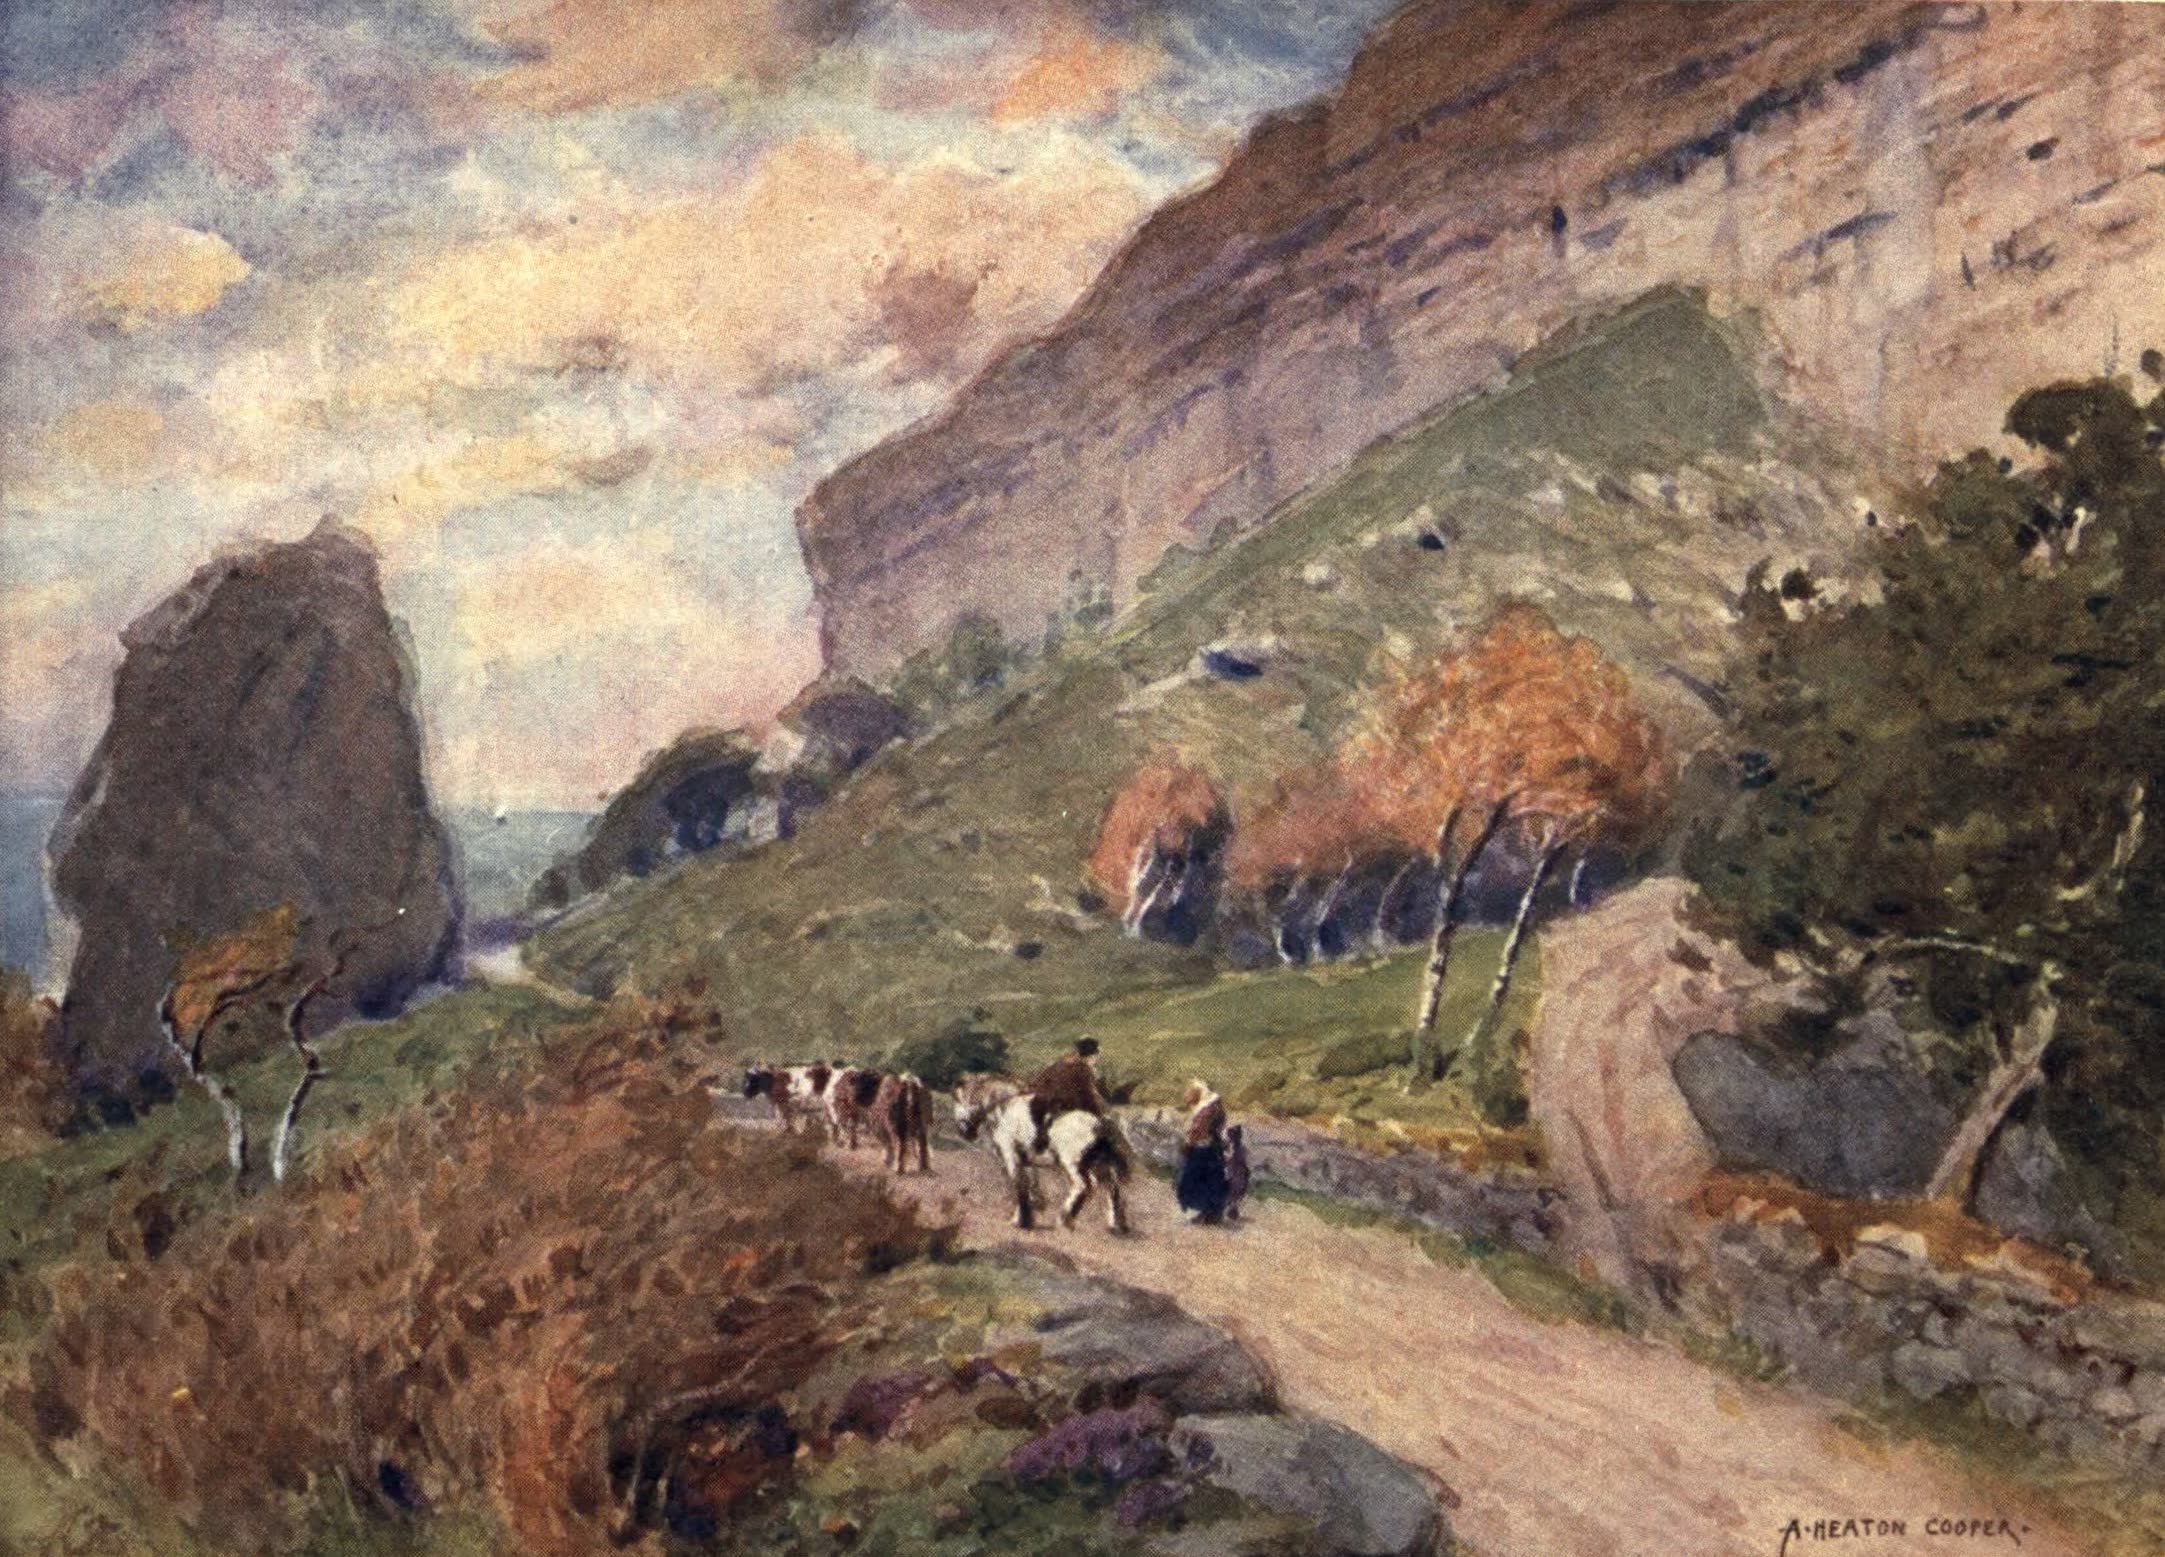 Isle of Wight Painted and Described - The Undercliff near Ventnor (1908)